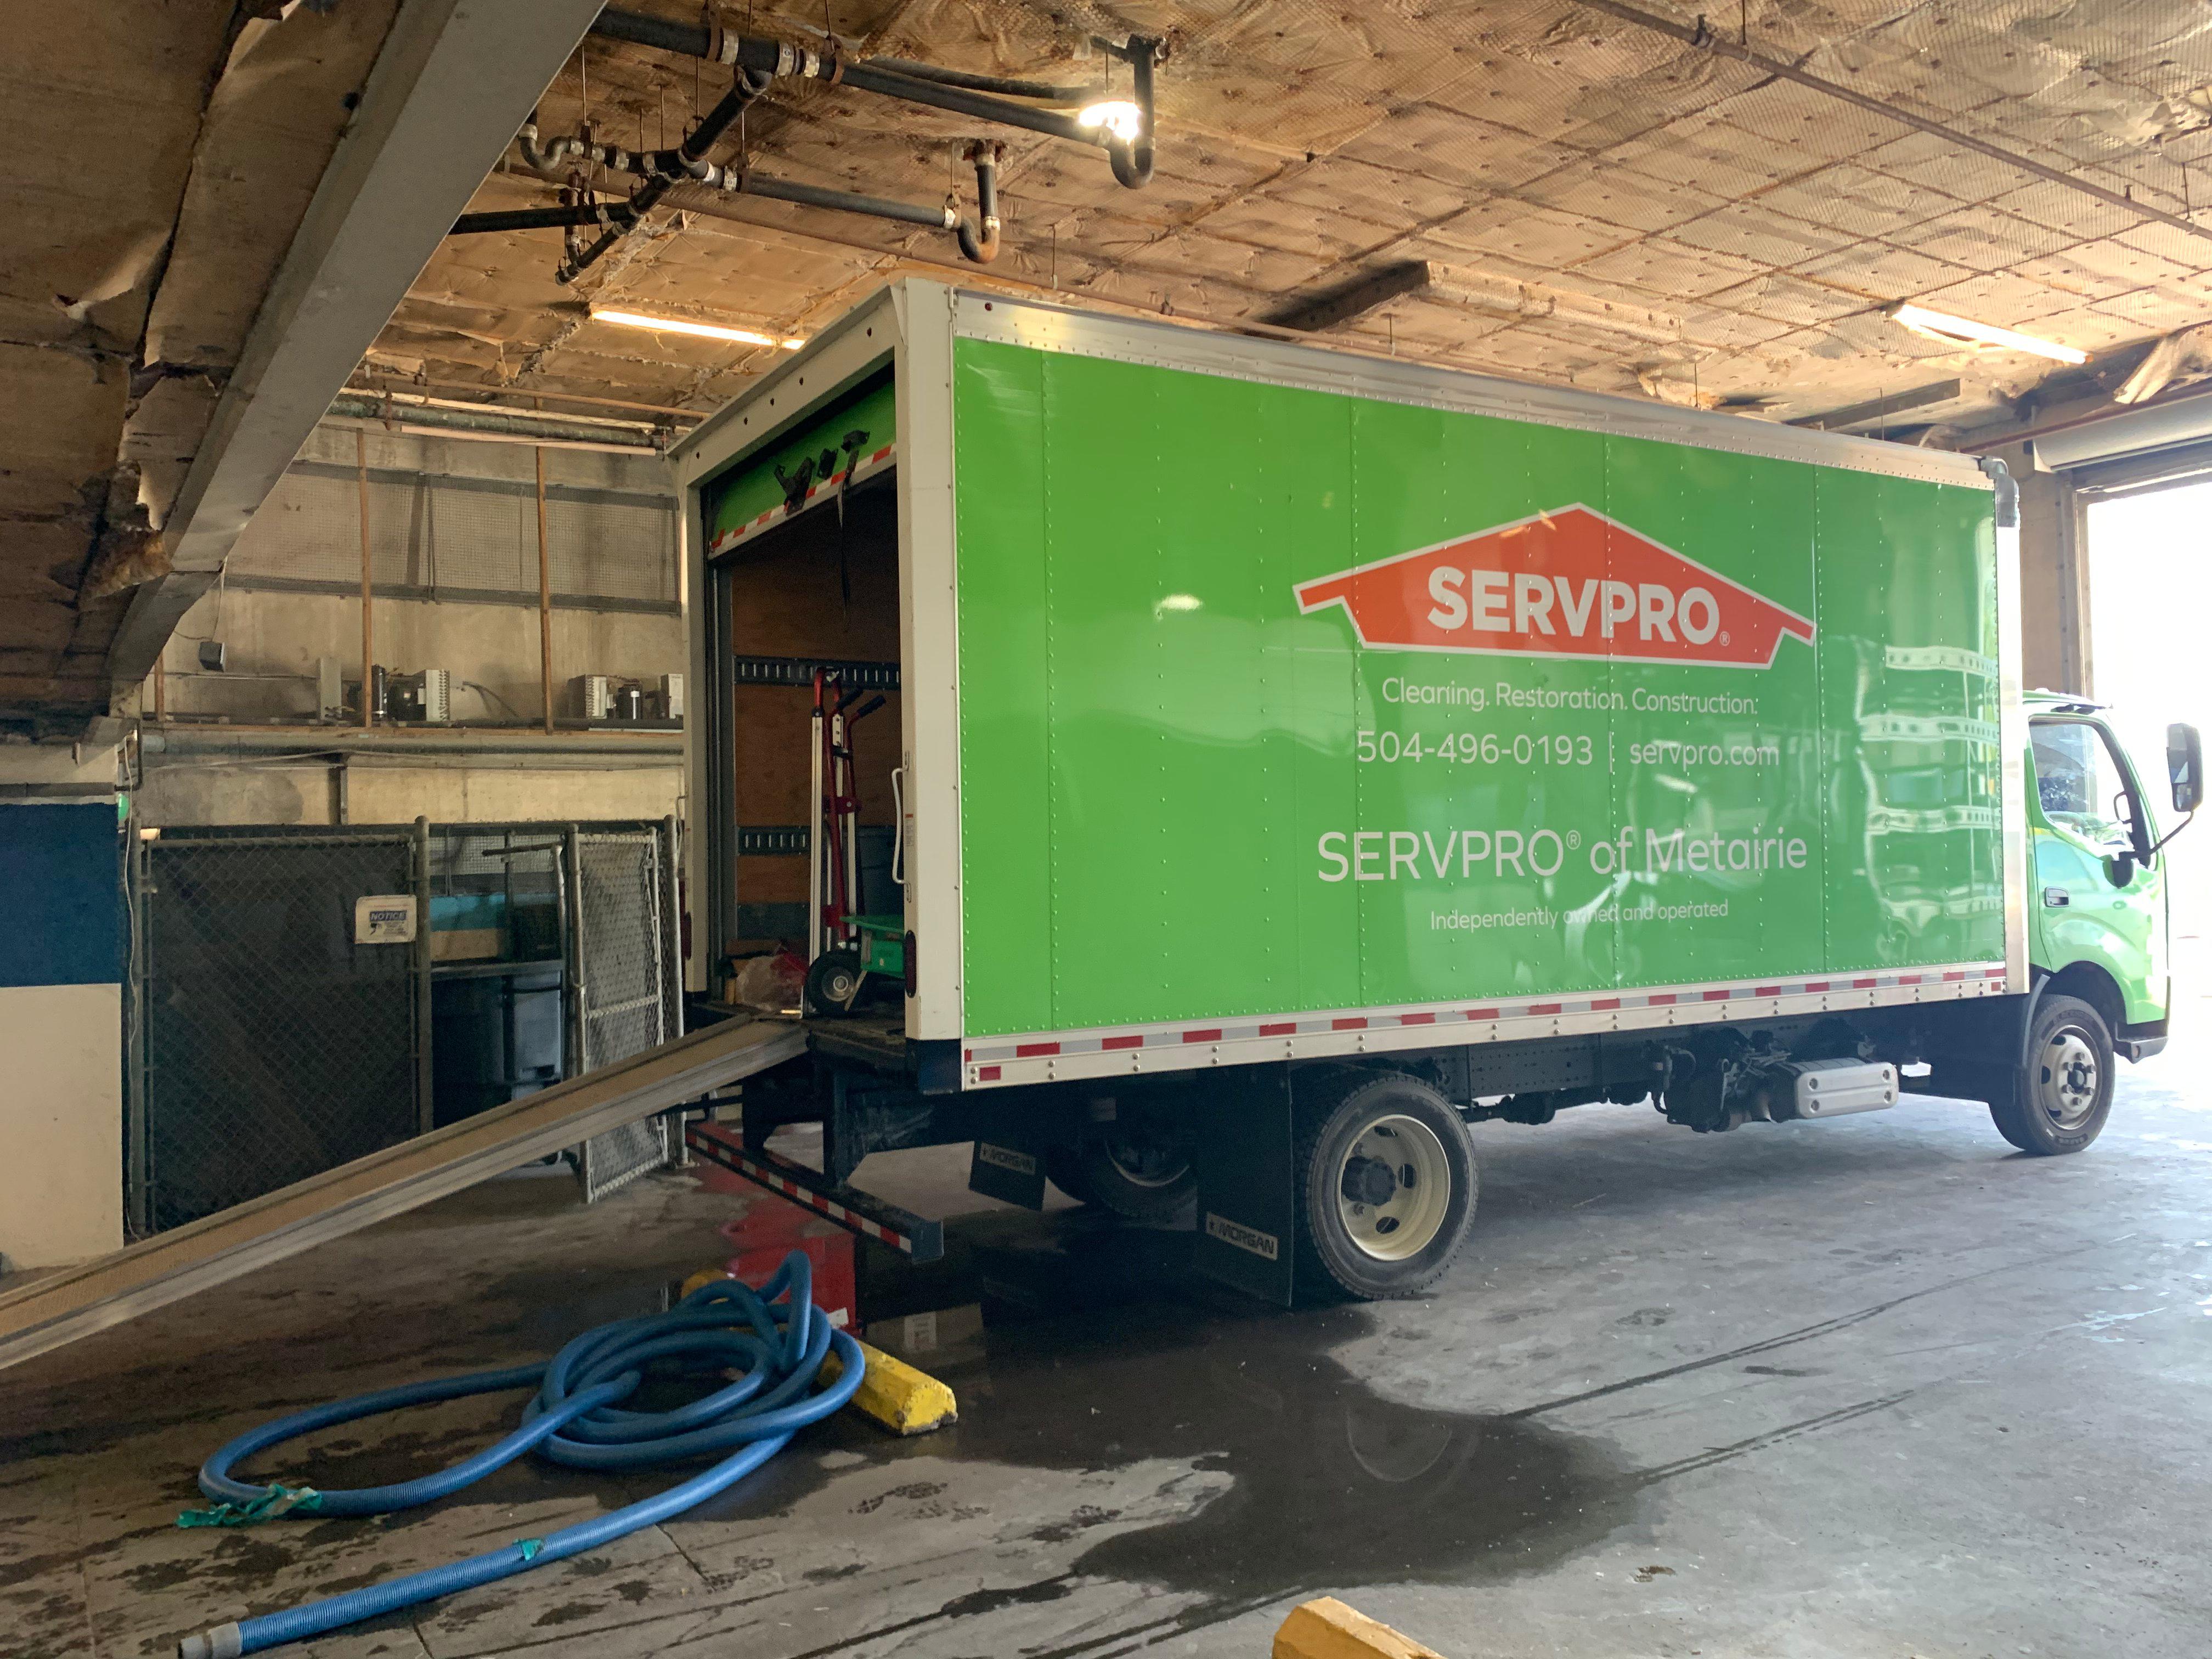 SERPRO trucks backing up and loading up in the freight elevator.